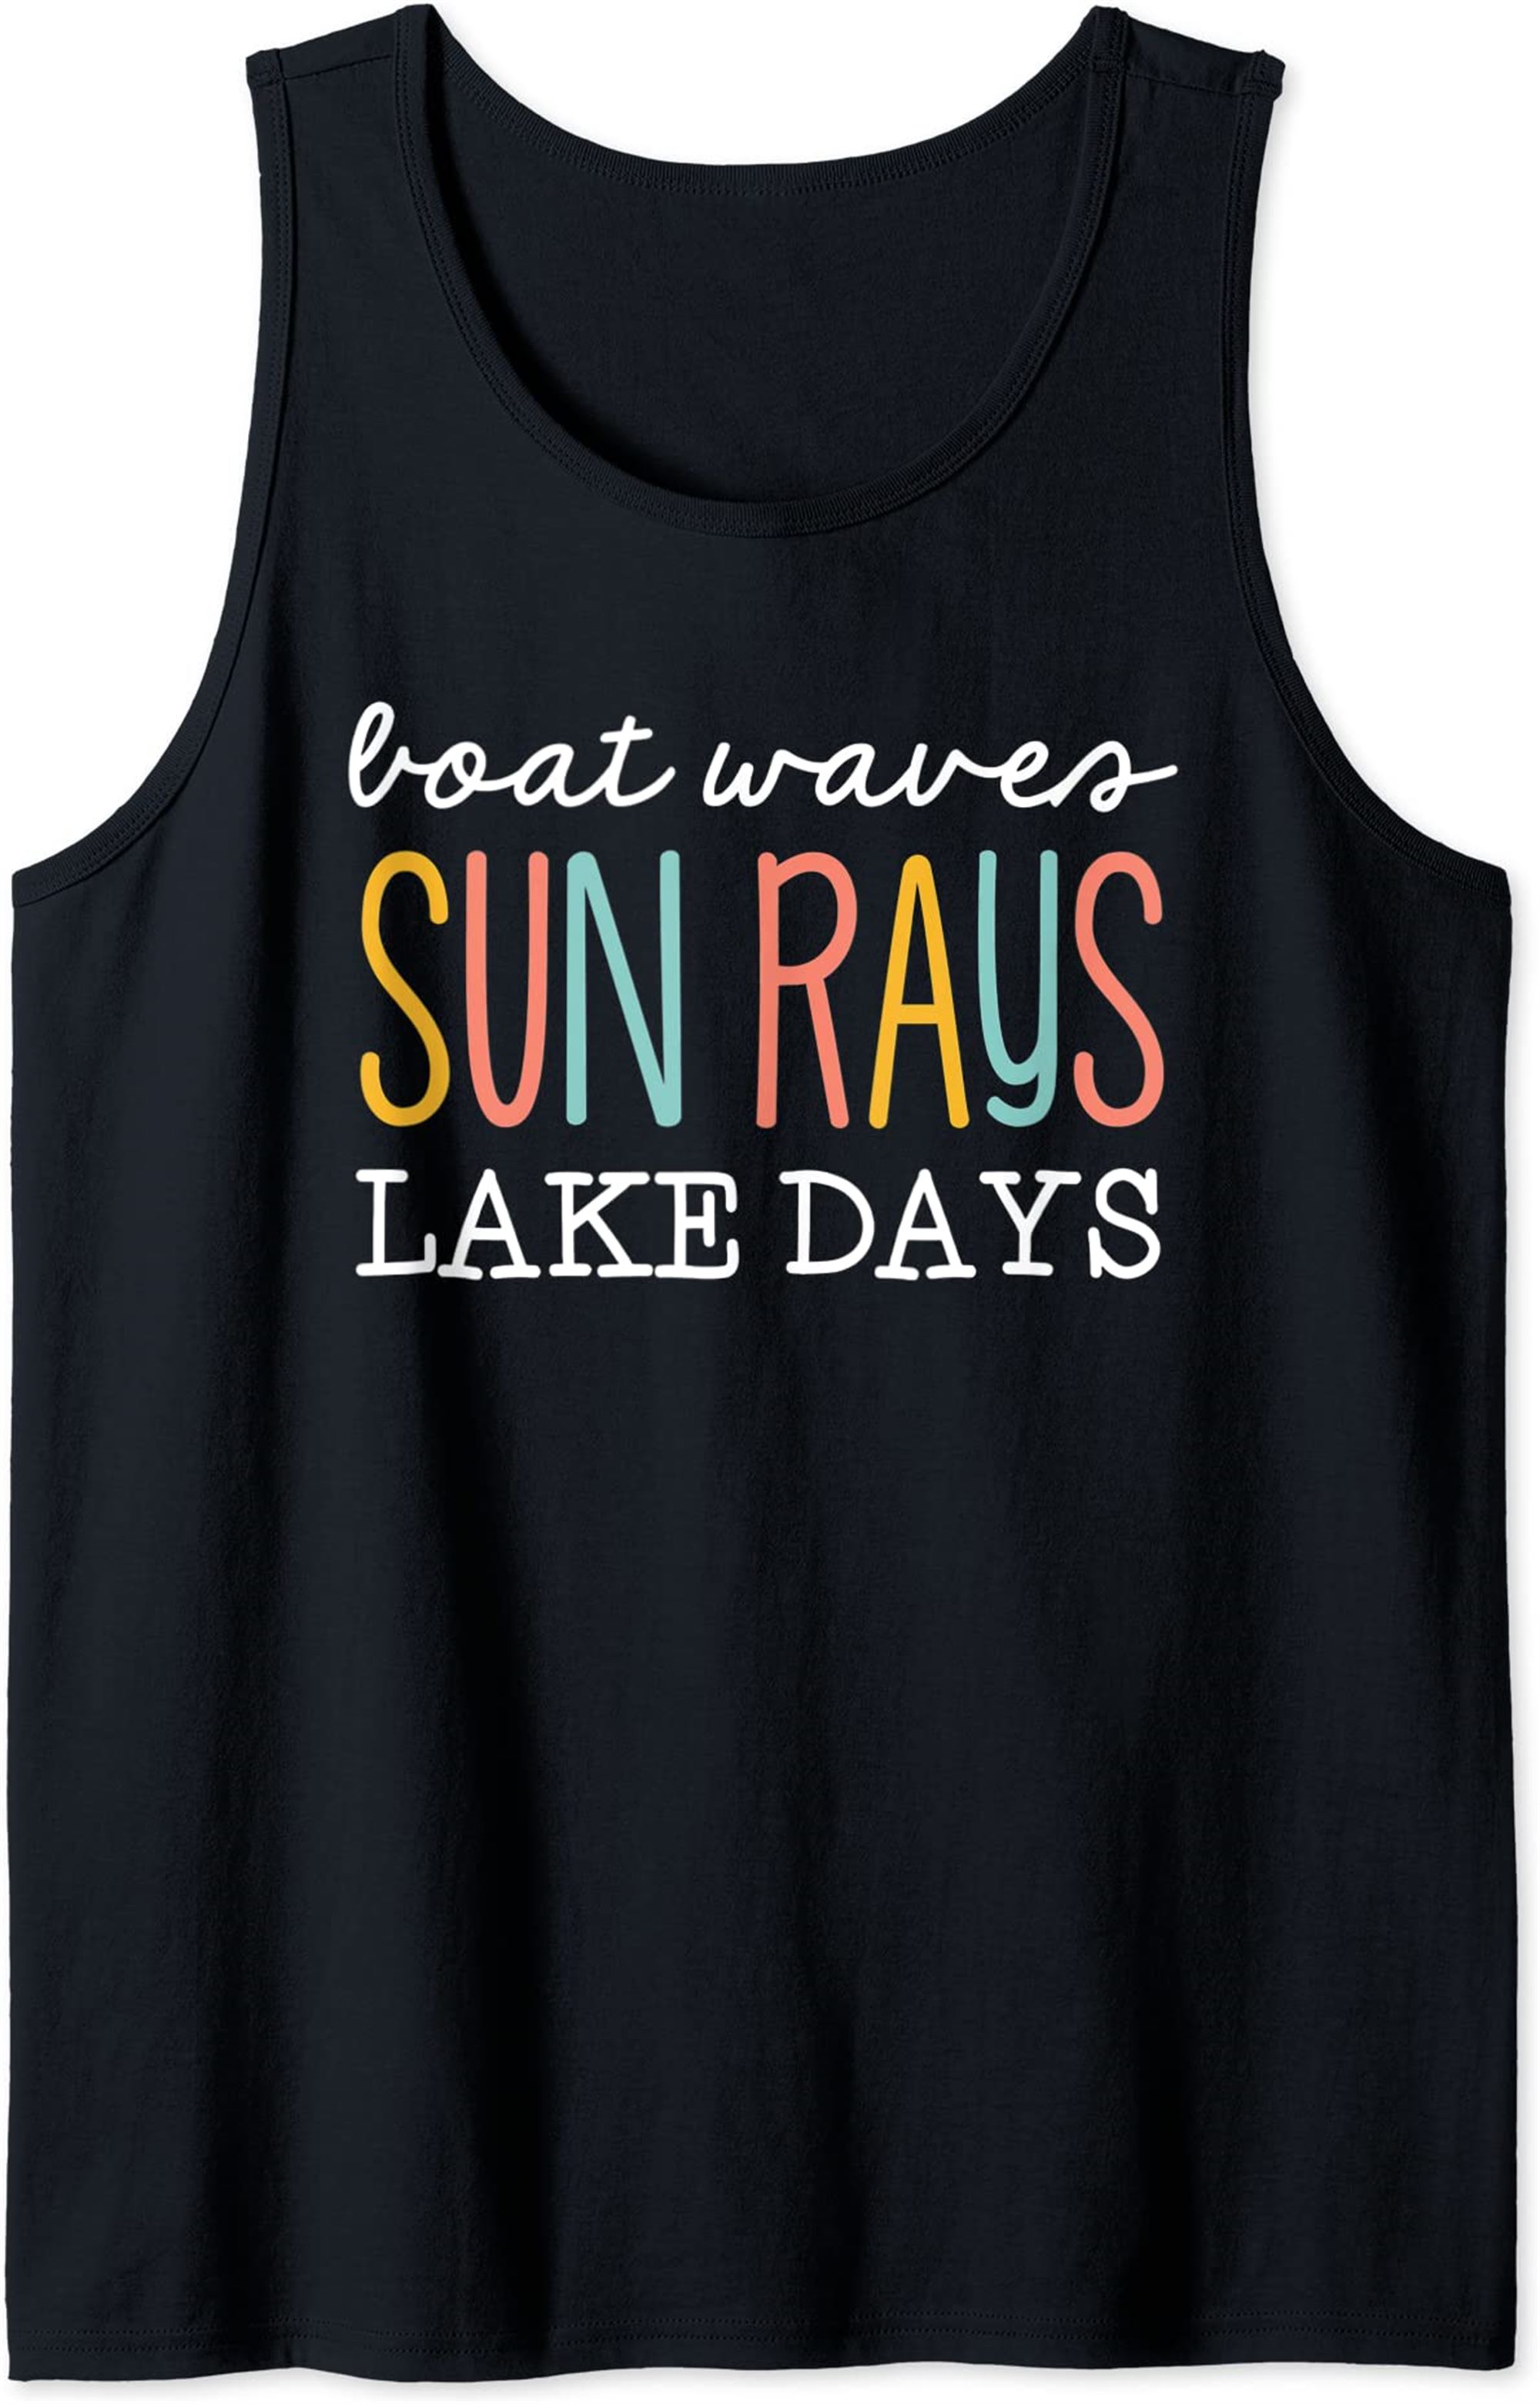 Boat Waves Sun Rays Lake Days Funny Vacation Tank Top Size Up To 5xl